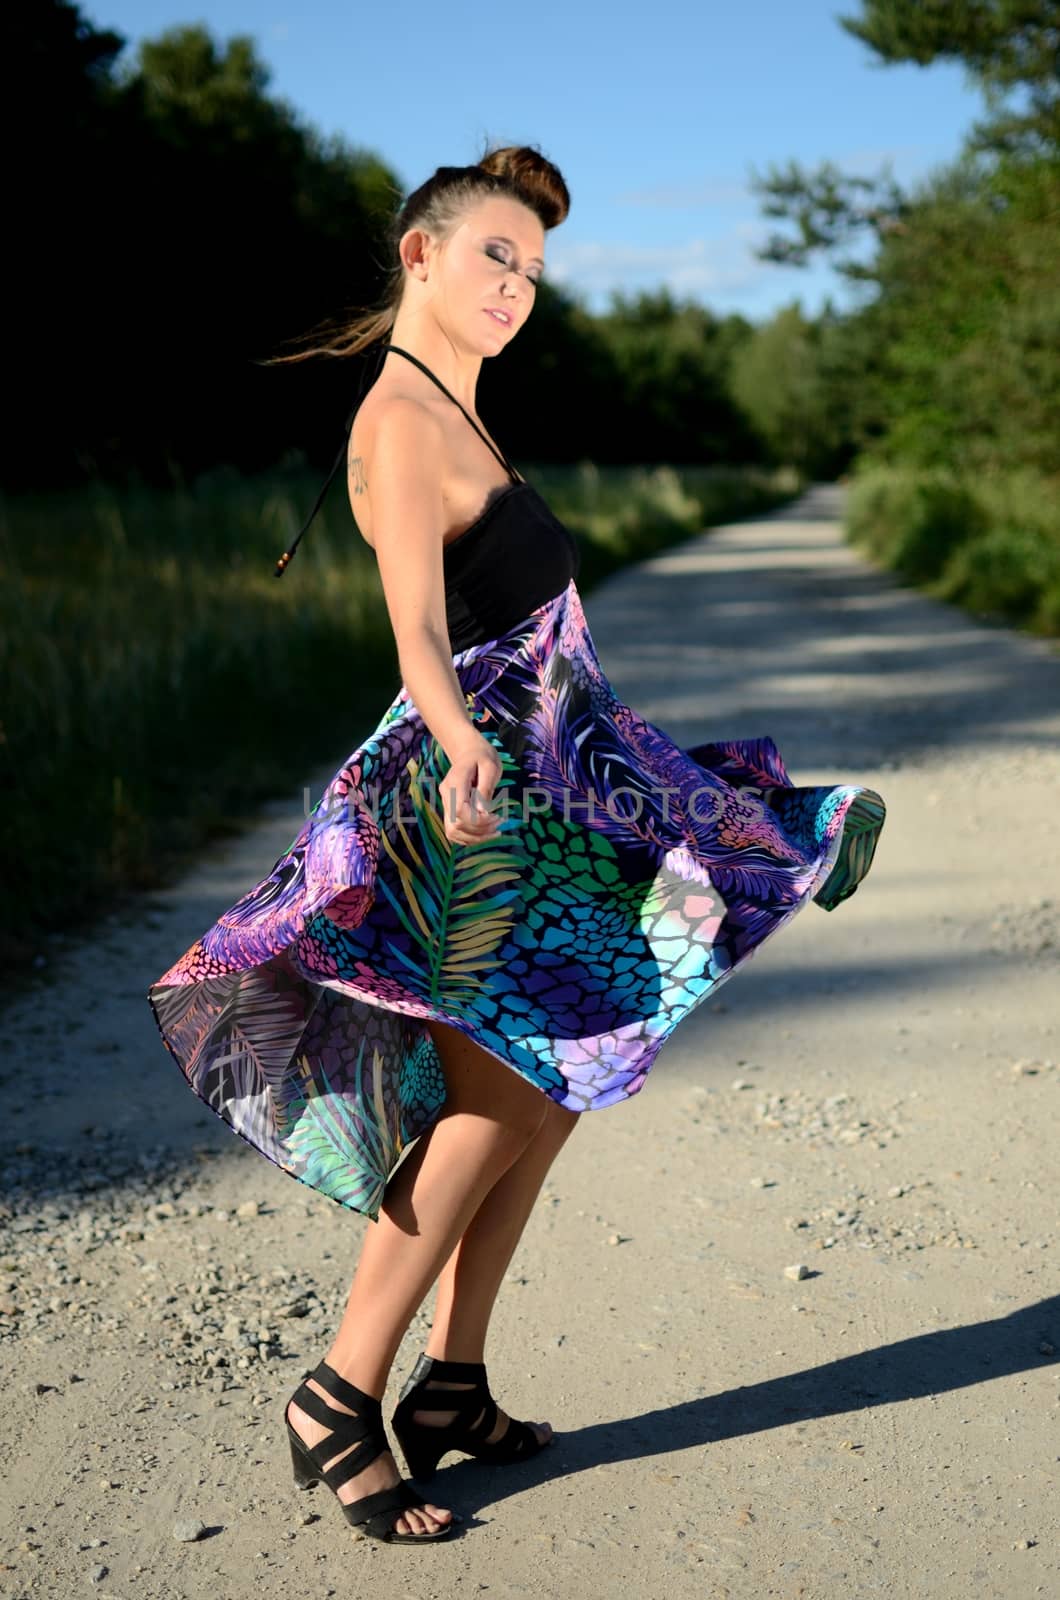 Girl with colorful dress spins around. Female model from Poland with road and forest as background.